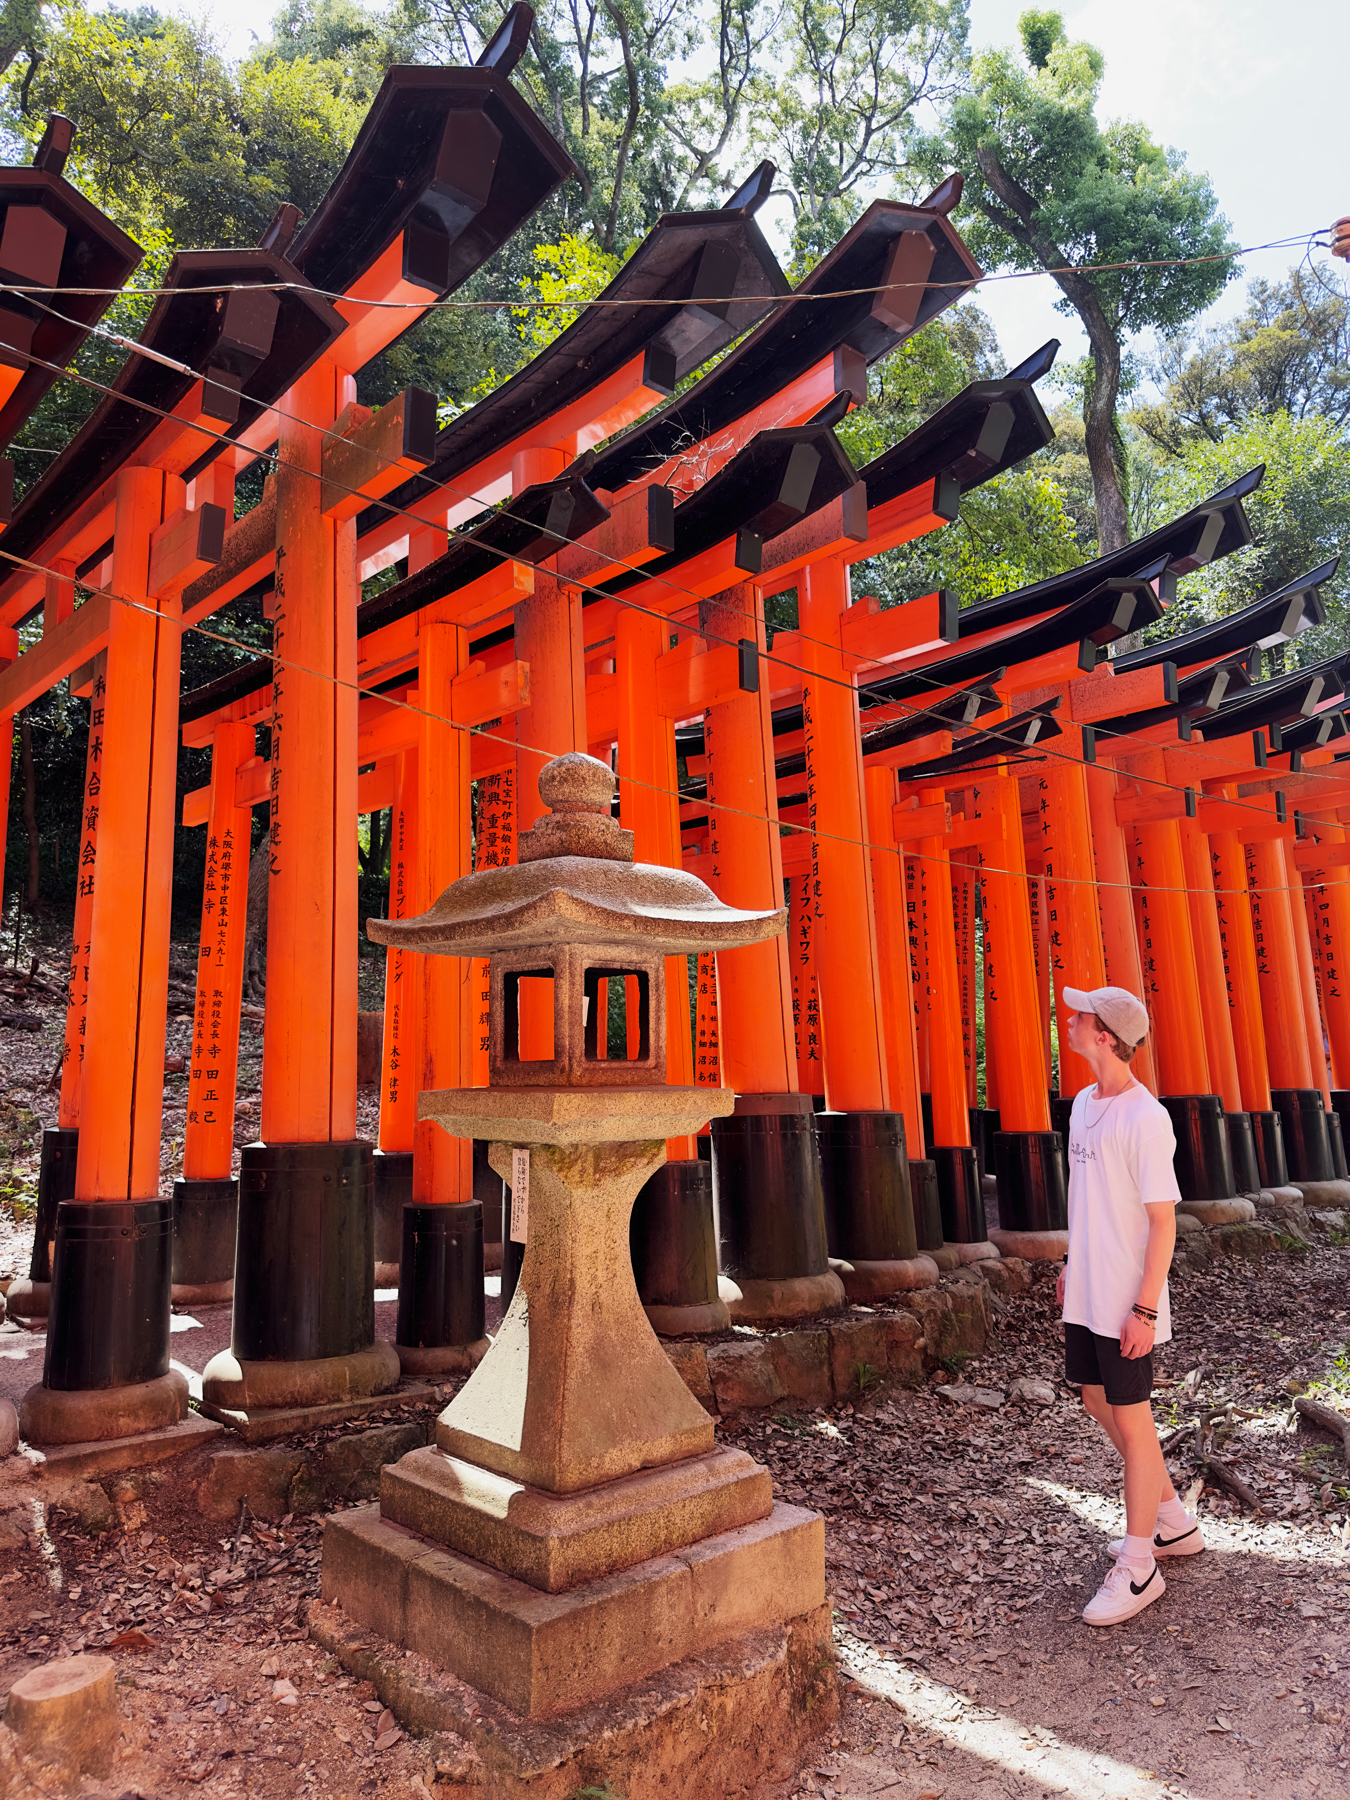 My eldest Son standing next to a traditional stone lantern, with a background of vibrant orange torii gates at Fushimi Inari Shrine in Kyoto, Japan.